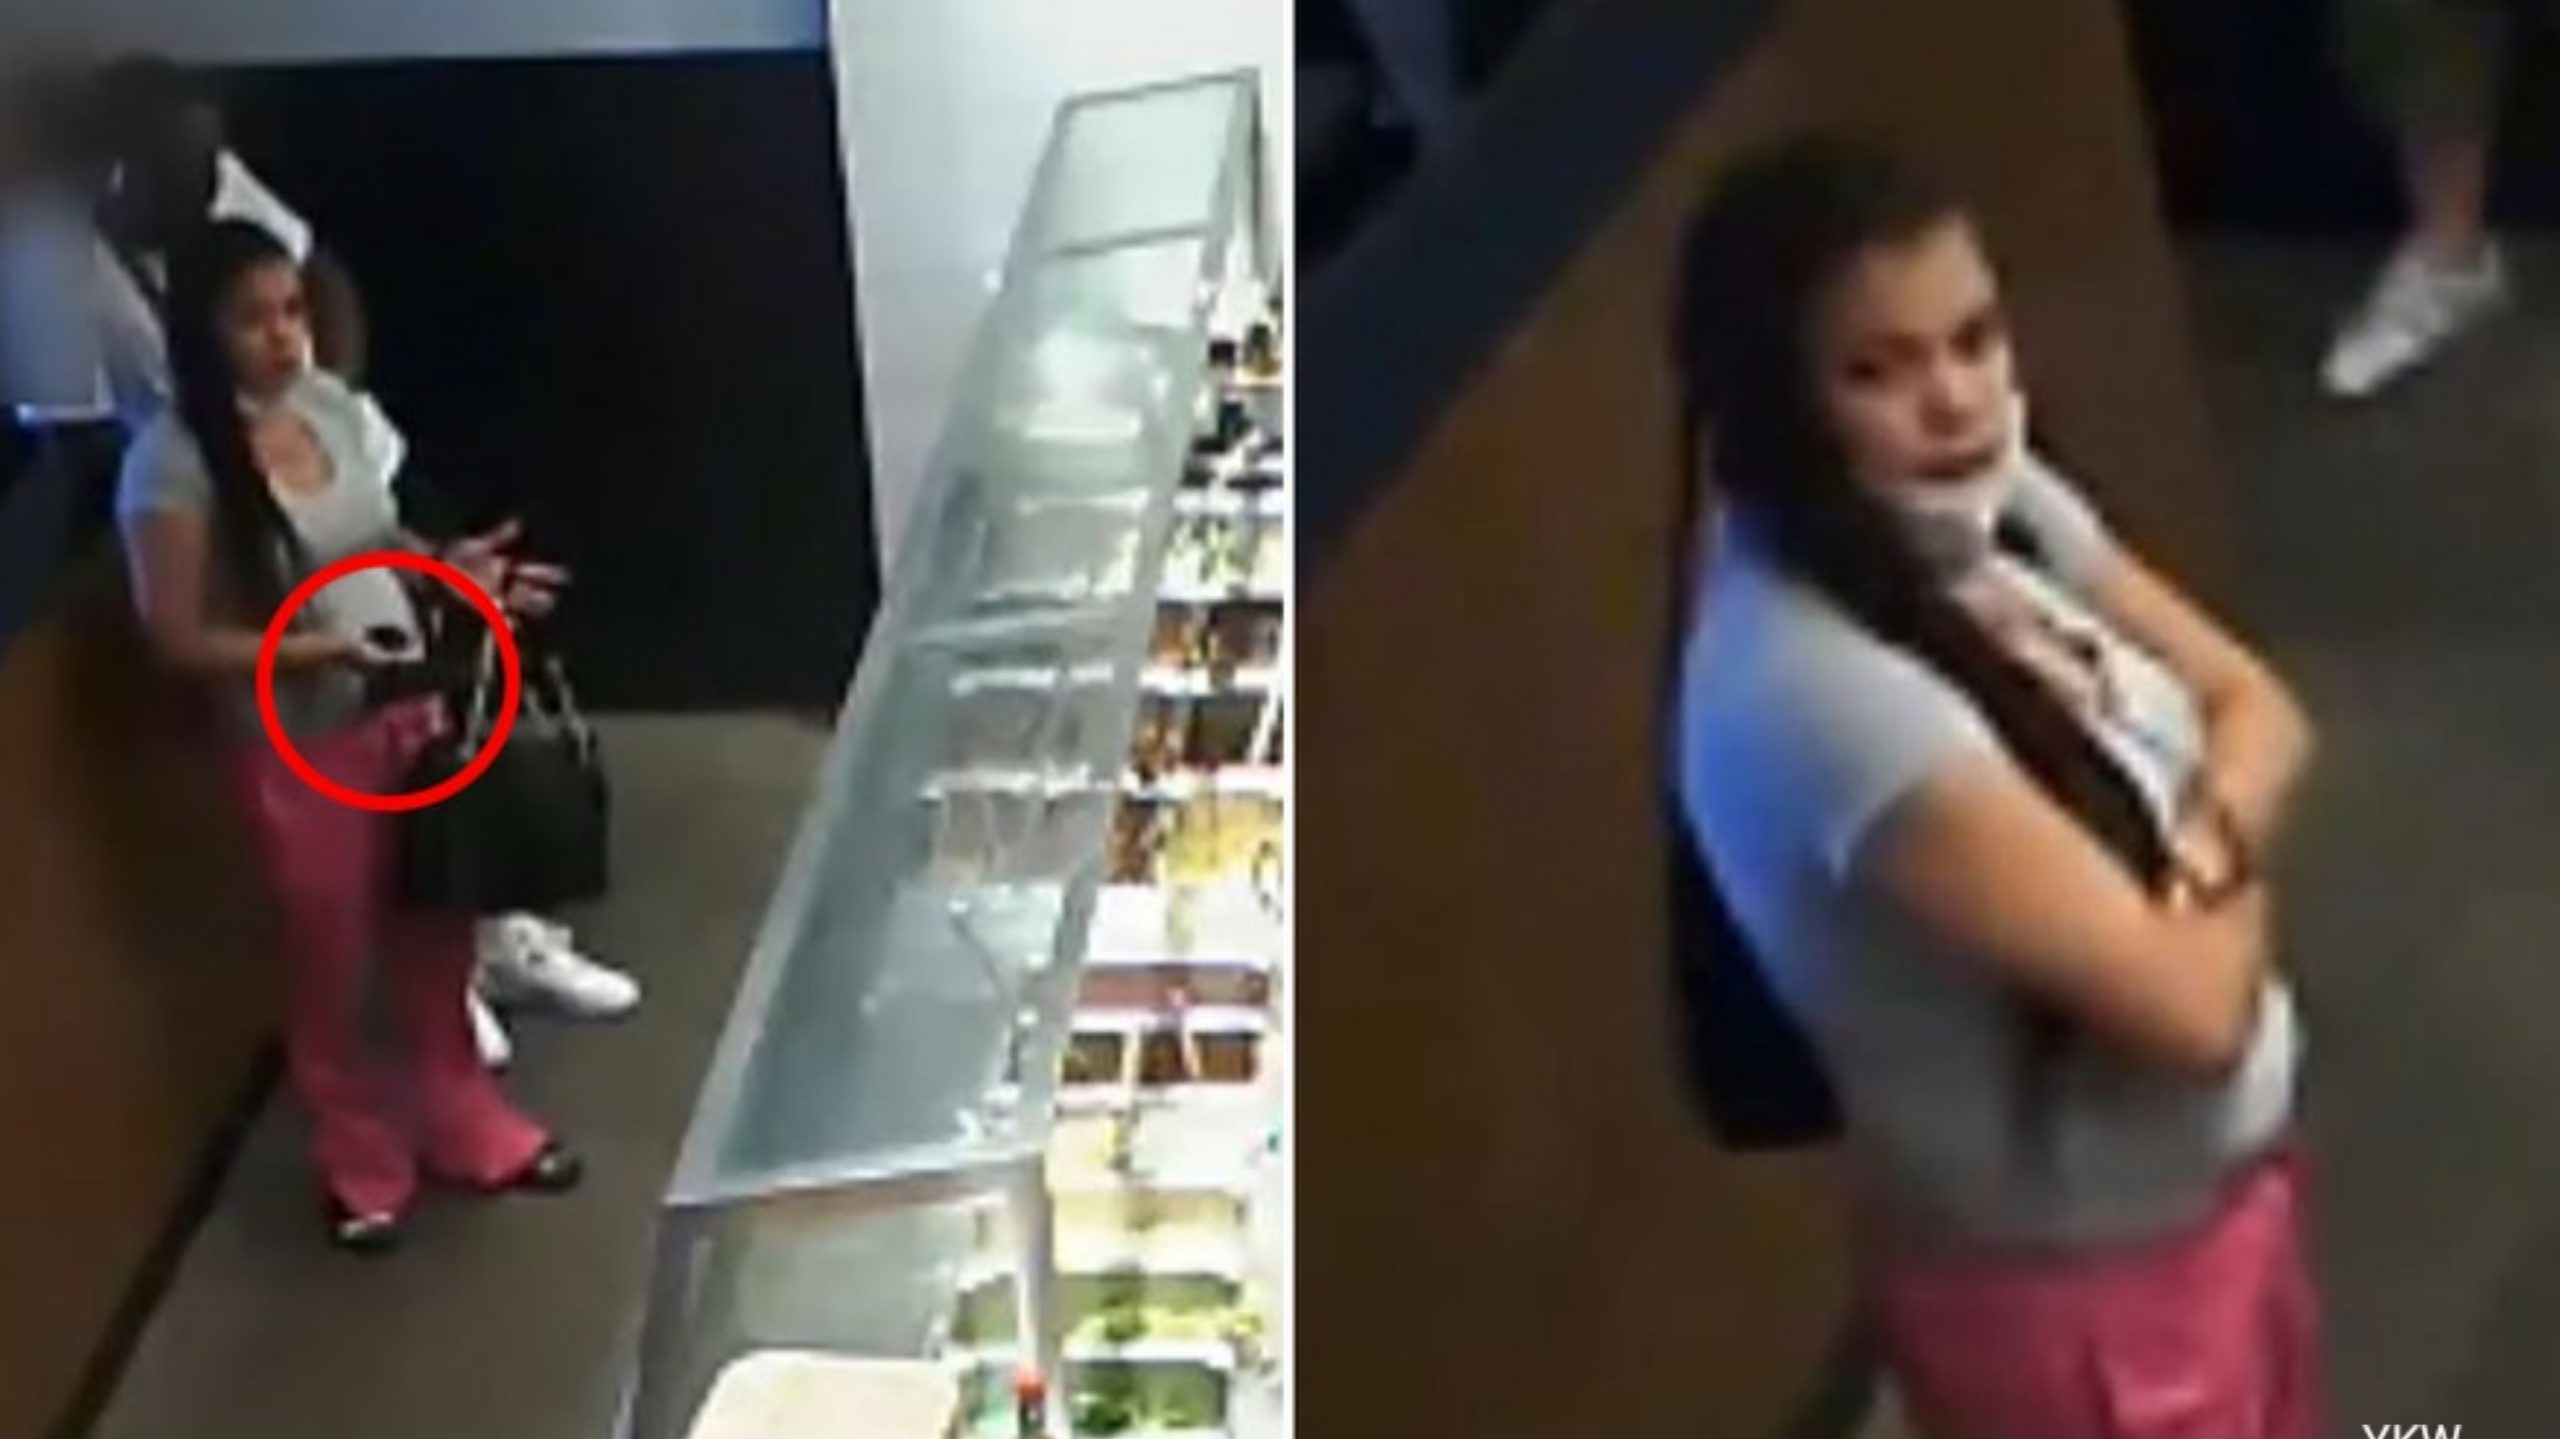 Chipotle Customer Threatens Staff With Gun: “Somebody Better Give Me My Food!”